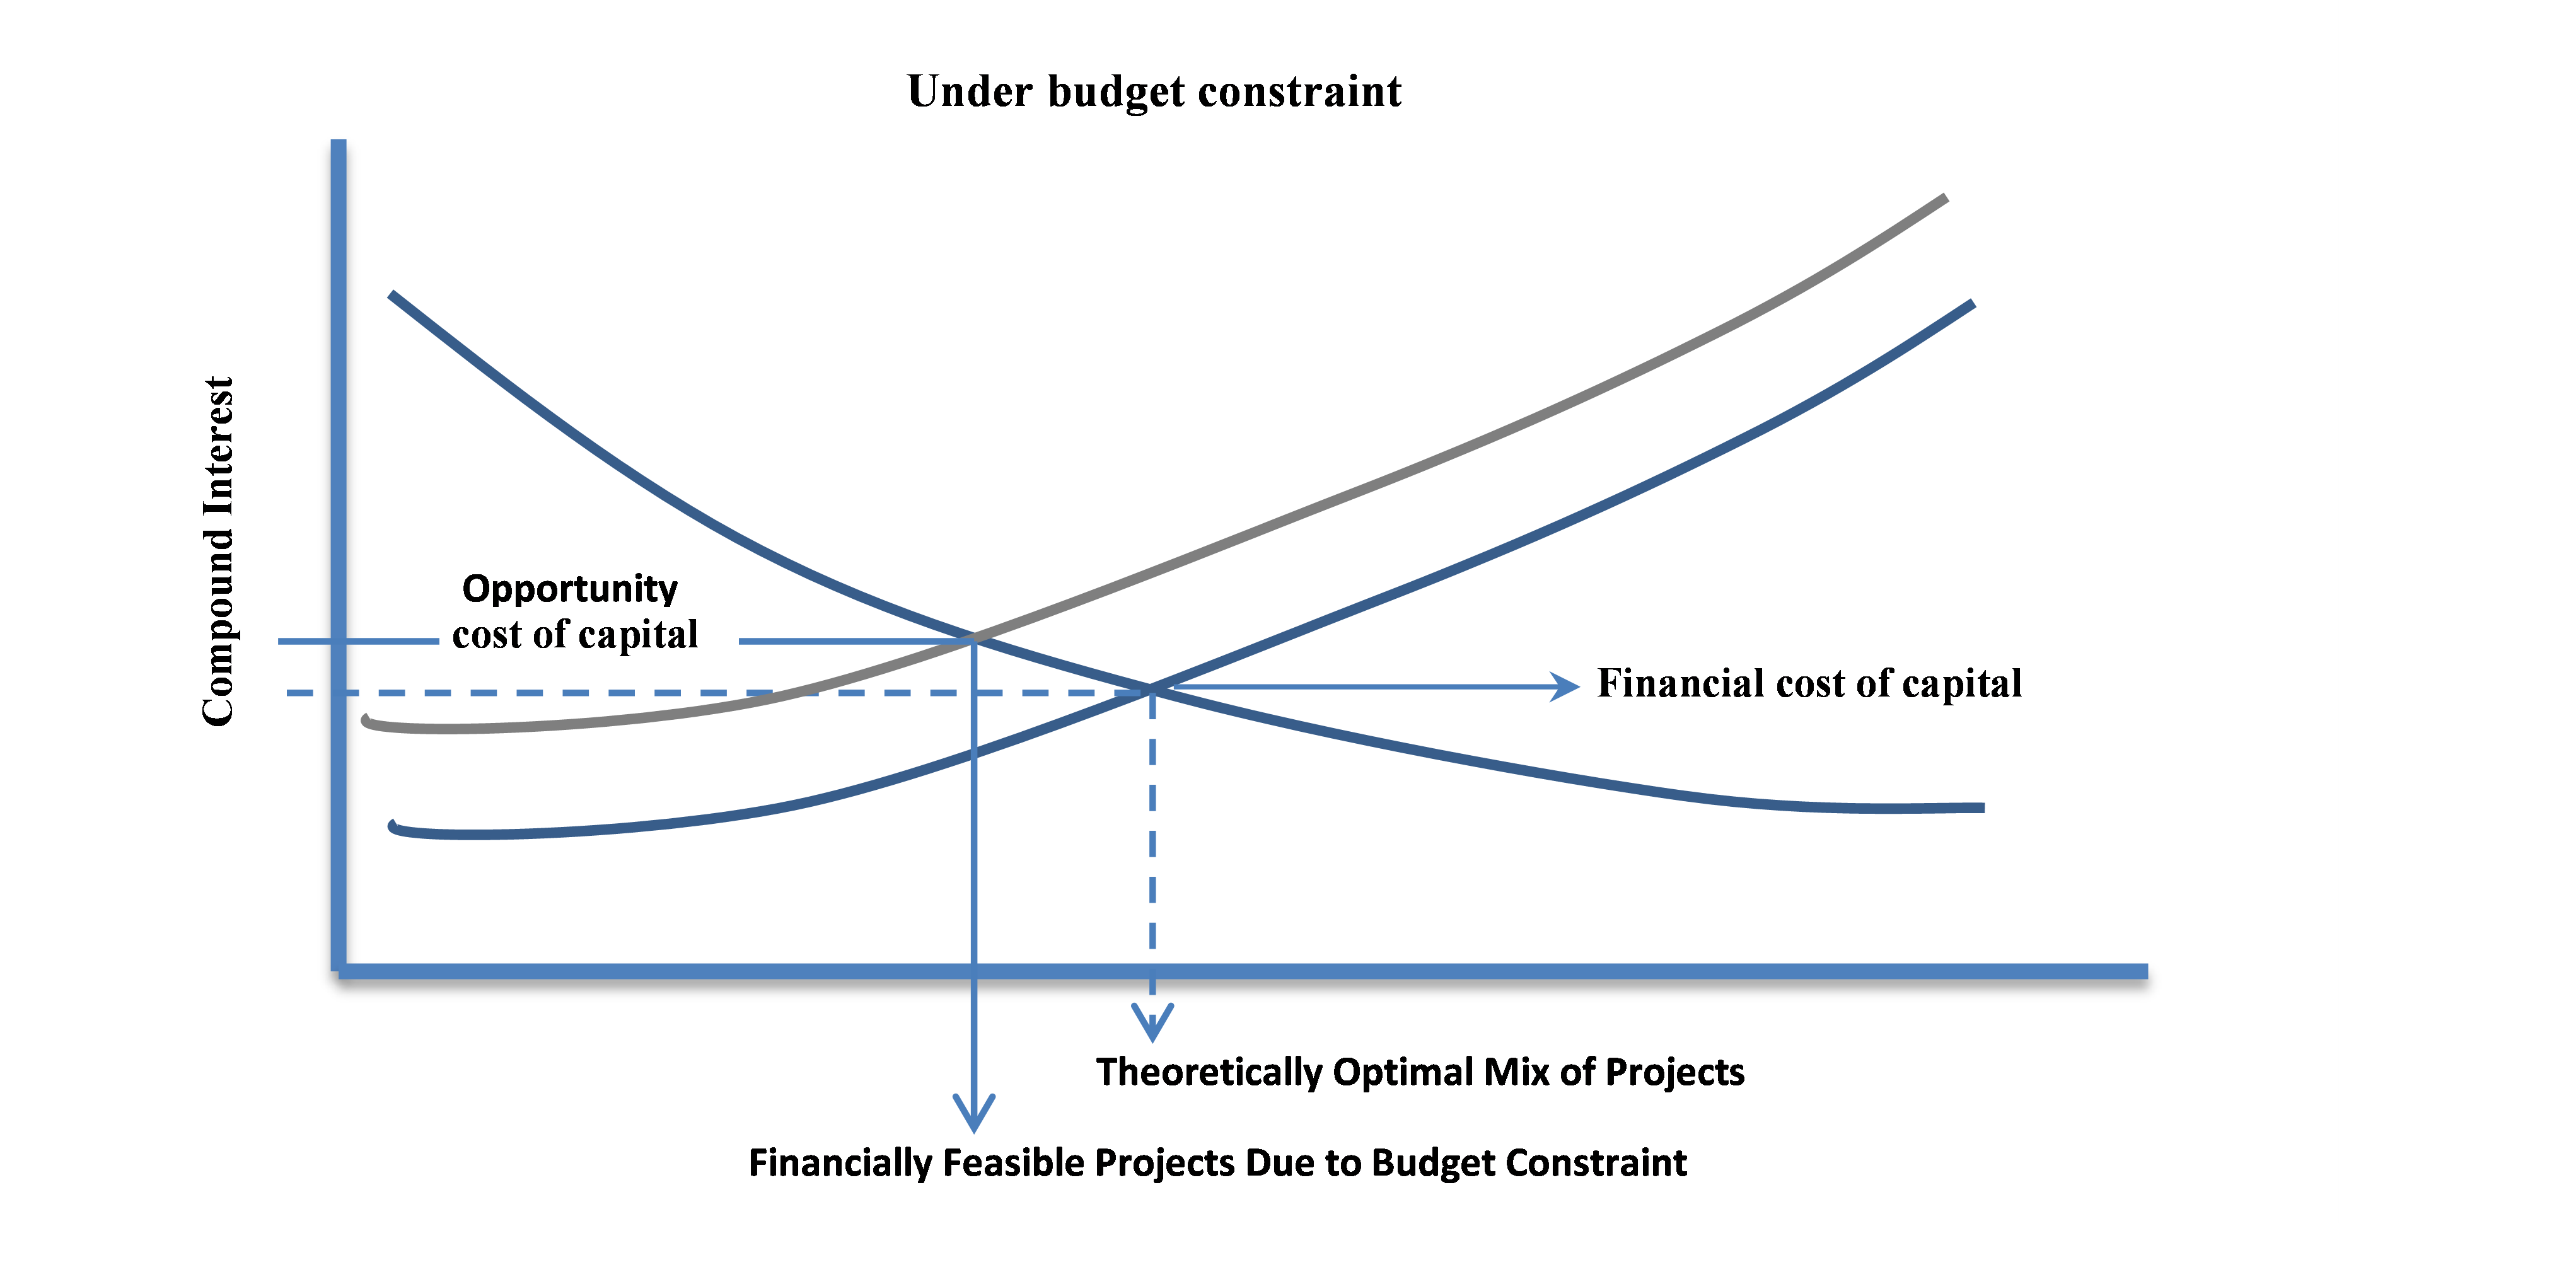 Under a budget constraint incremental cost of capital is higher which Increases the cost of capital & decreases the feasible mix of projects